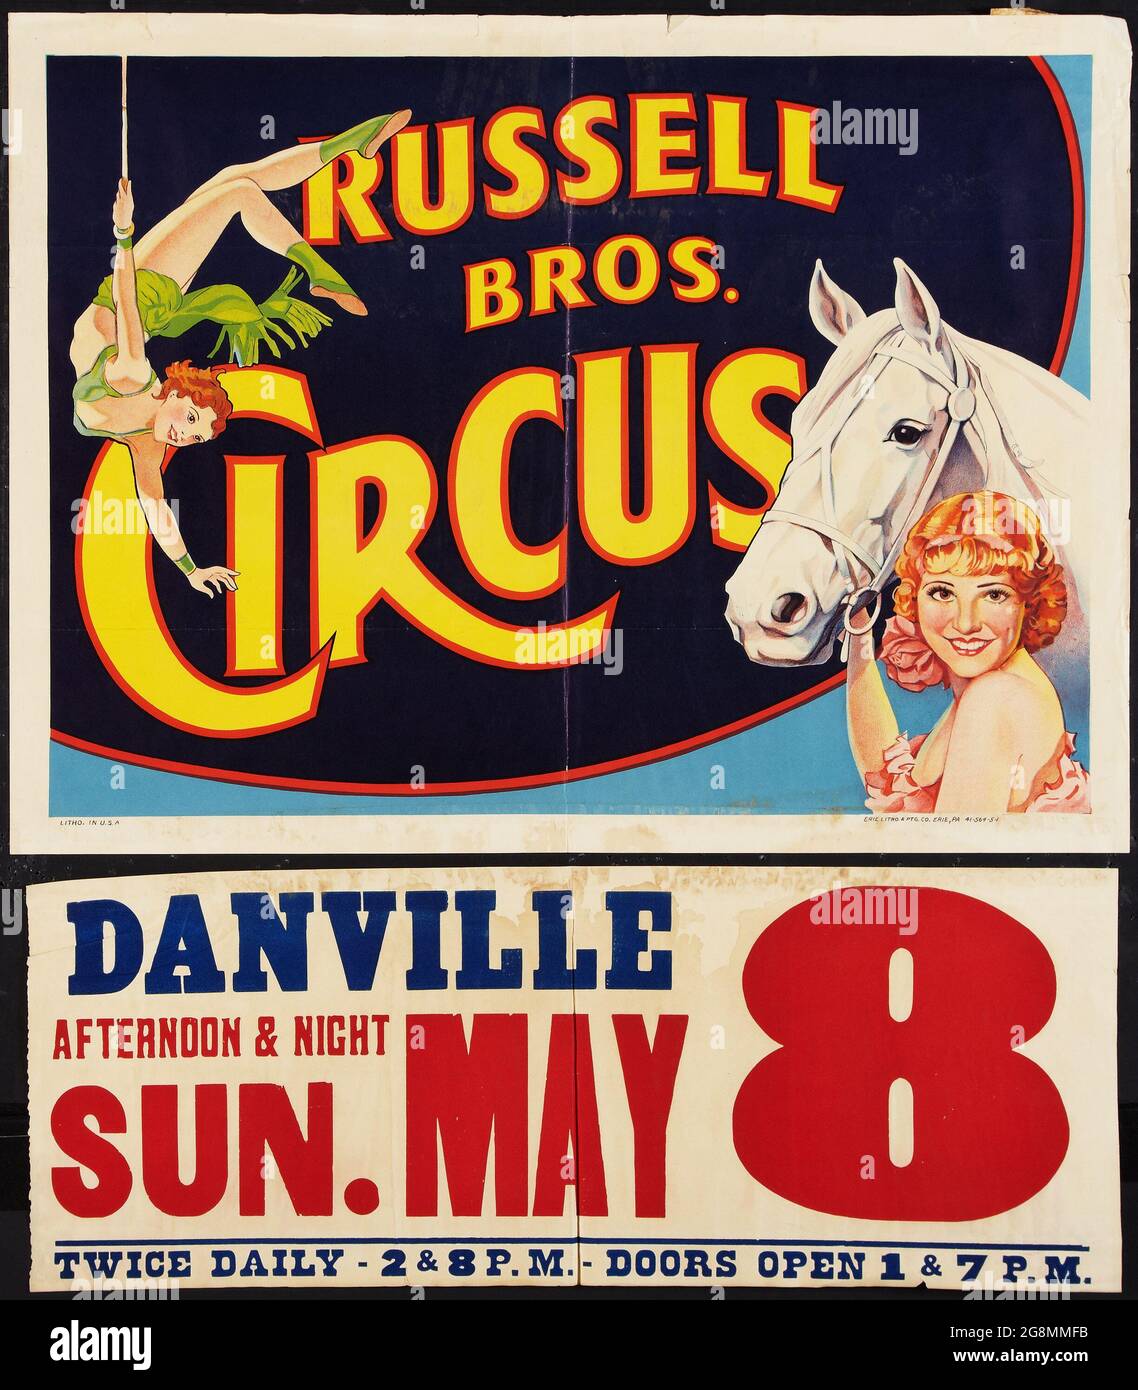 Russell Brothers Circus Poster (Russell Bros). Vintage Circus Poster, das in Danville verwendet wird. 8.Mai 1938. Stockfoto